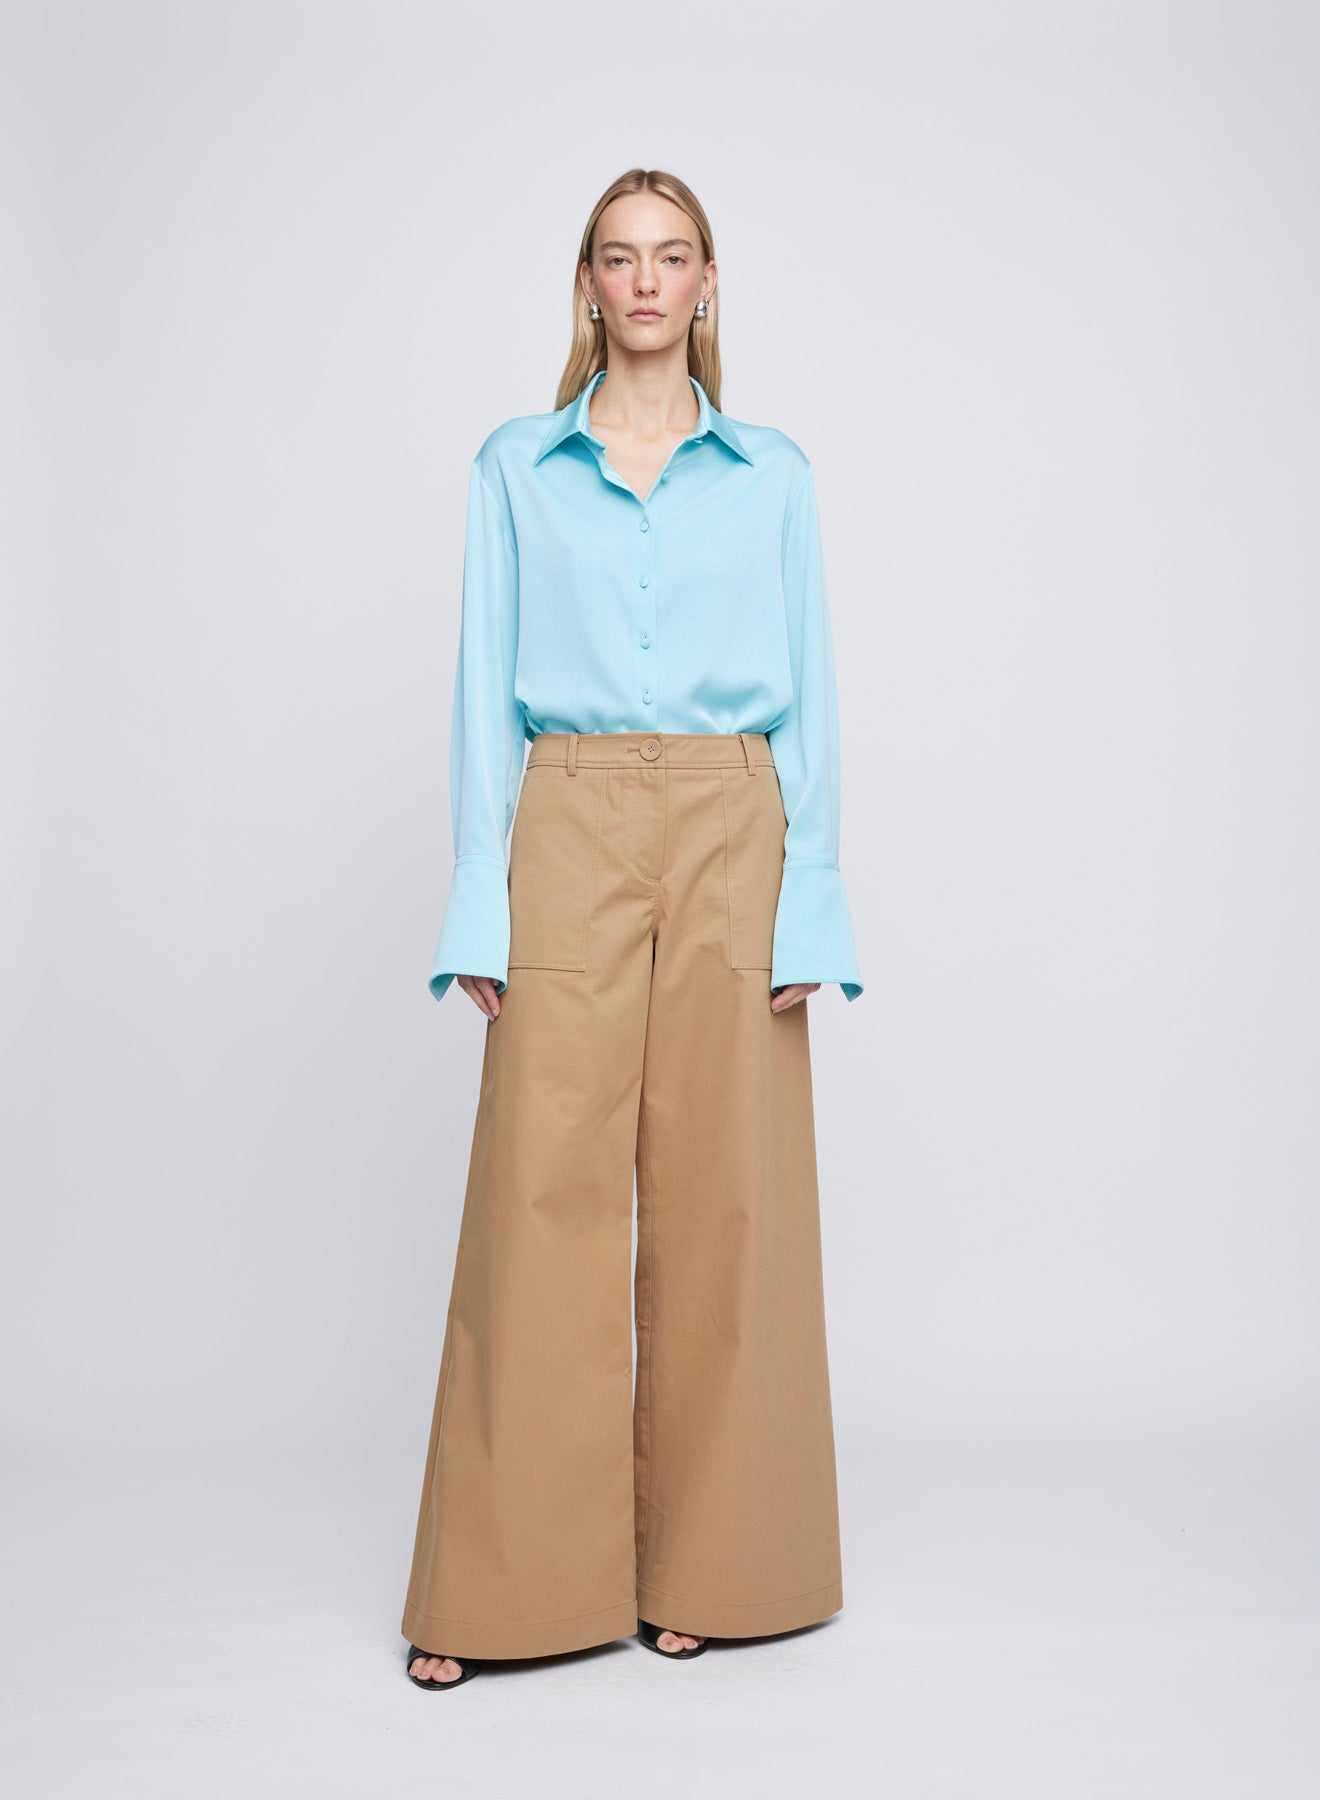 The ANNA QUAN Lana Shirt in Electric Teal is a collared shirt cut in a Japanese satin for a luxurious finish. Featuring extended cuffs and matching buttons to elevate the piece.